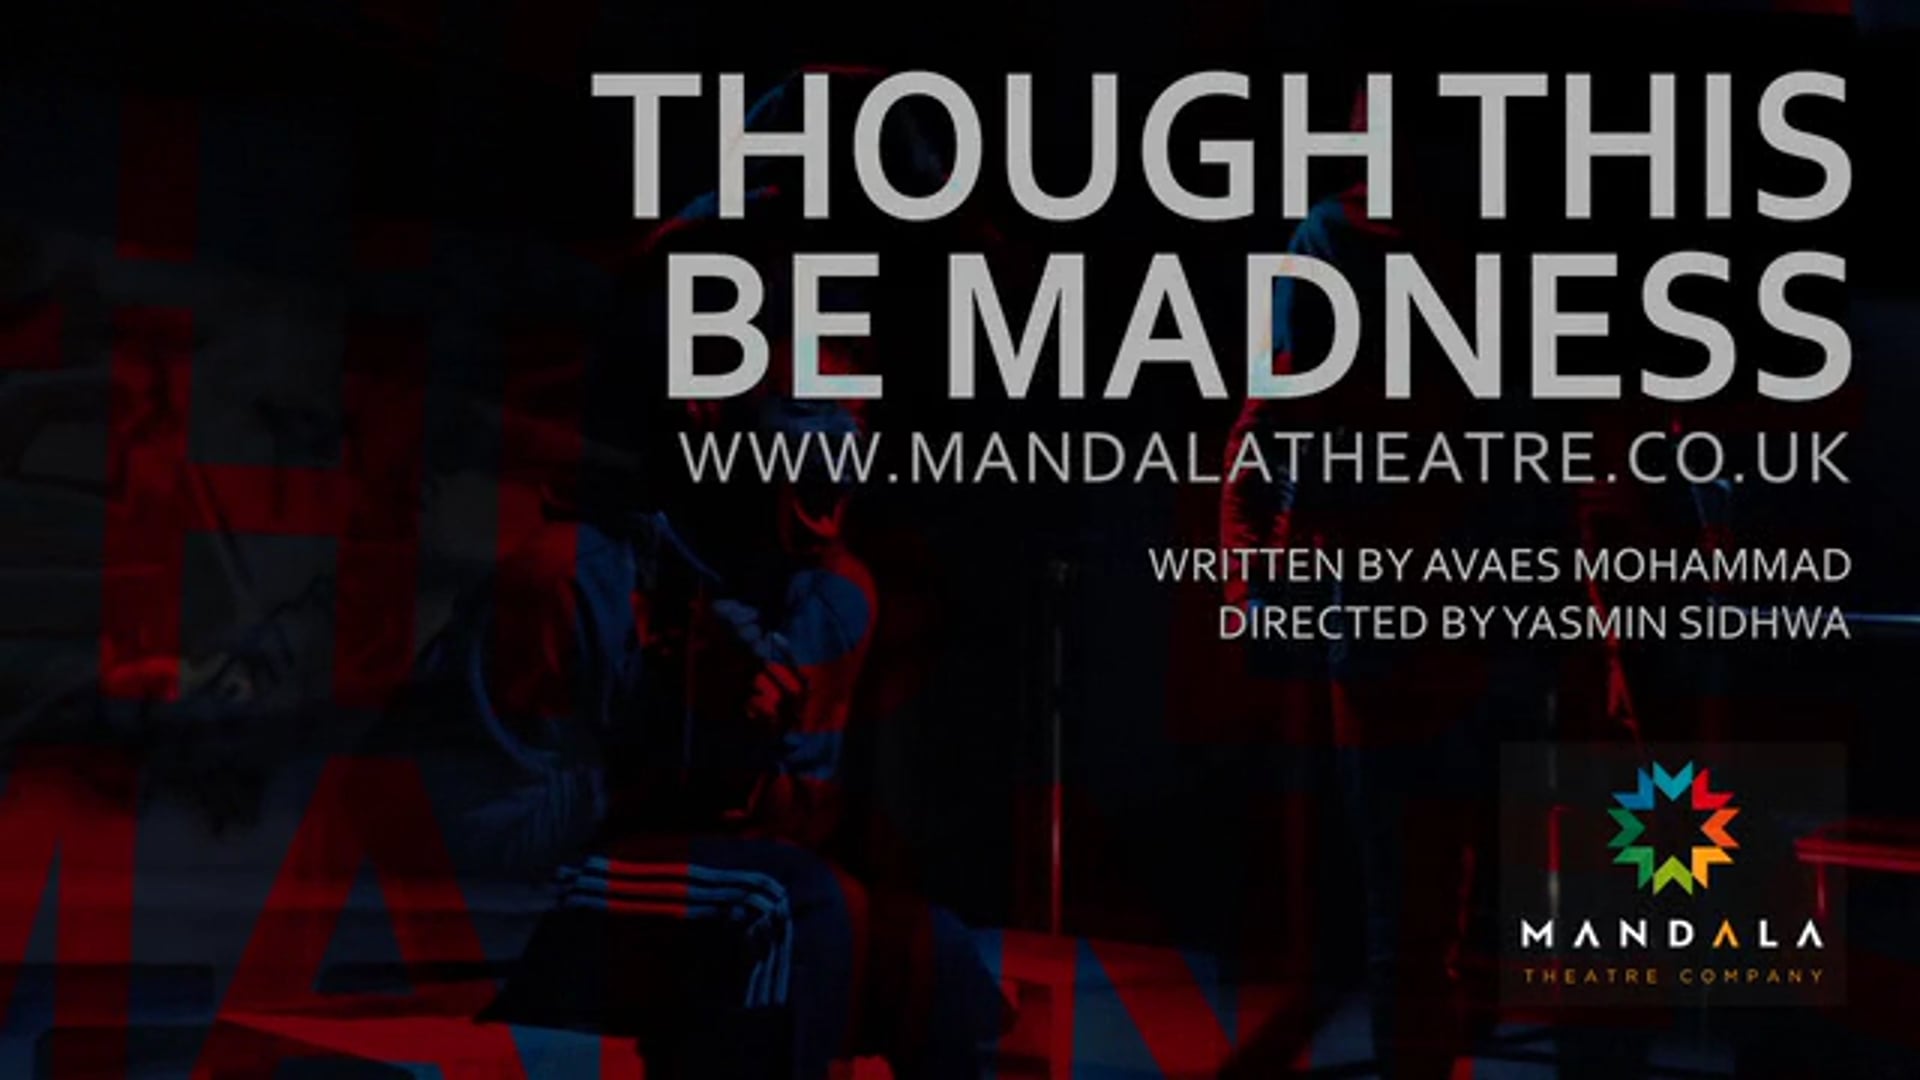 Mandala Theatre Company - 'Though this be Madness' trailer